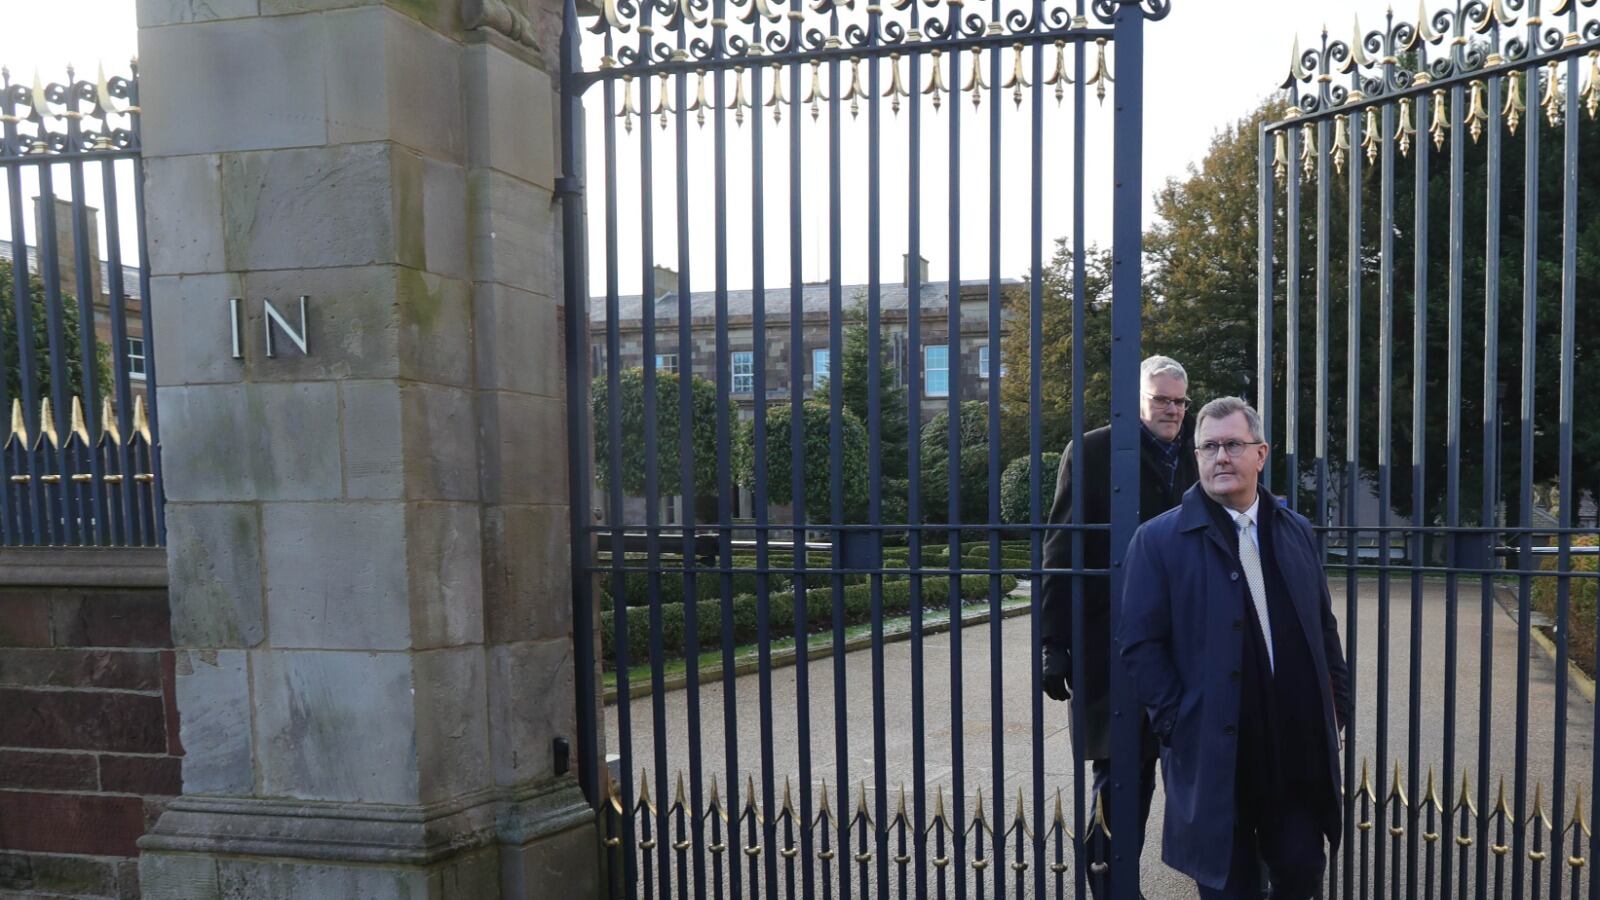 DUP leader Jeffrey Donaldson and deputy leader Gavin Robinson emerge from Hillsborough Castle following Monday's talks with Chris Heaton-Harris. PICTURE: COLM LENAGHAN